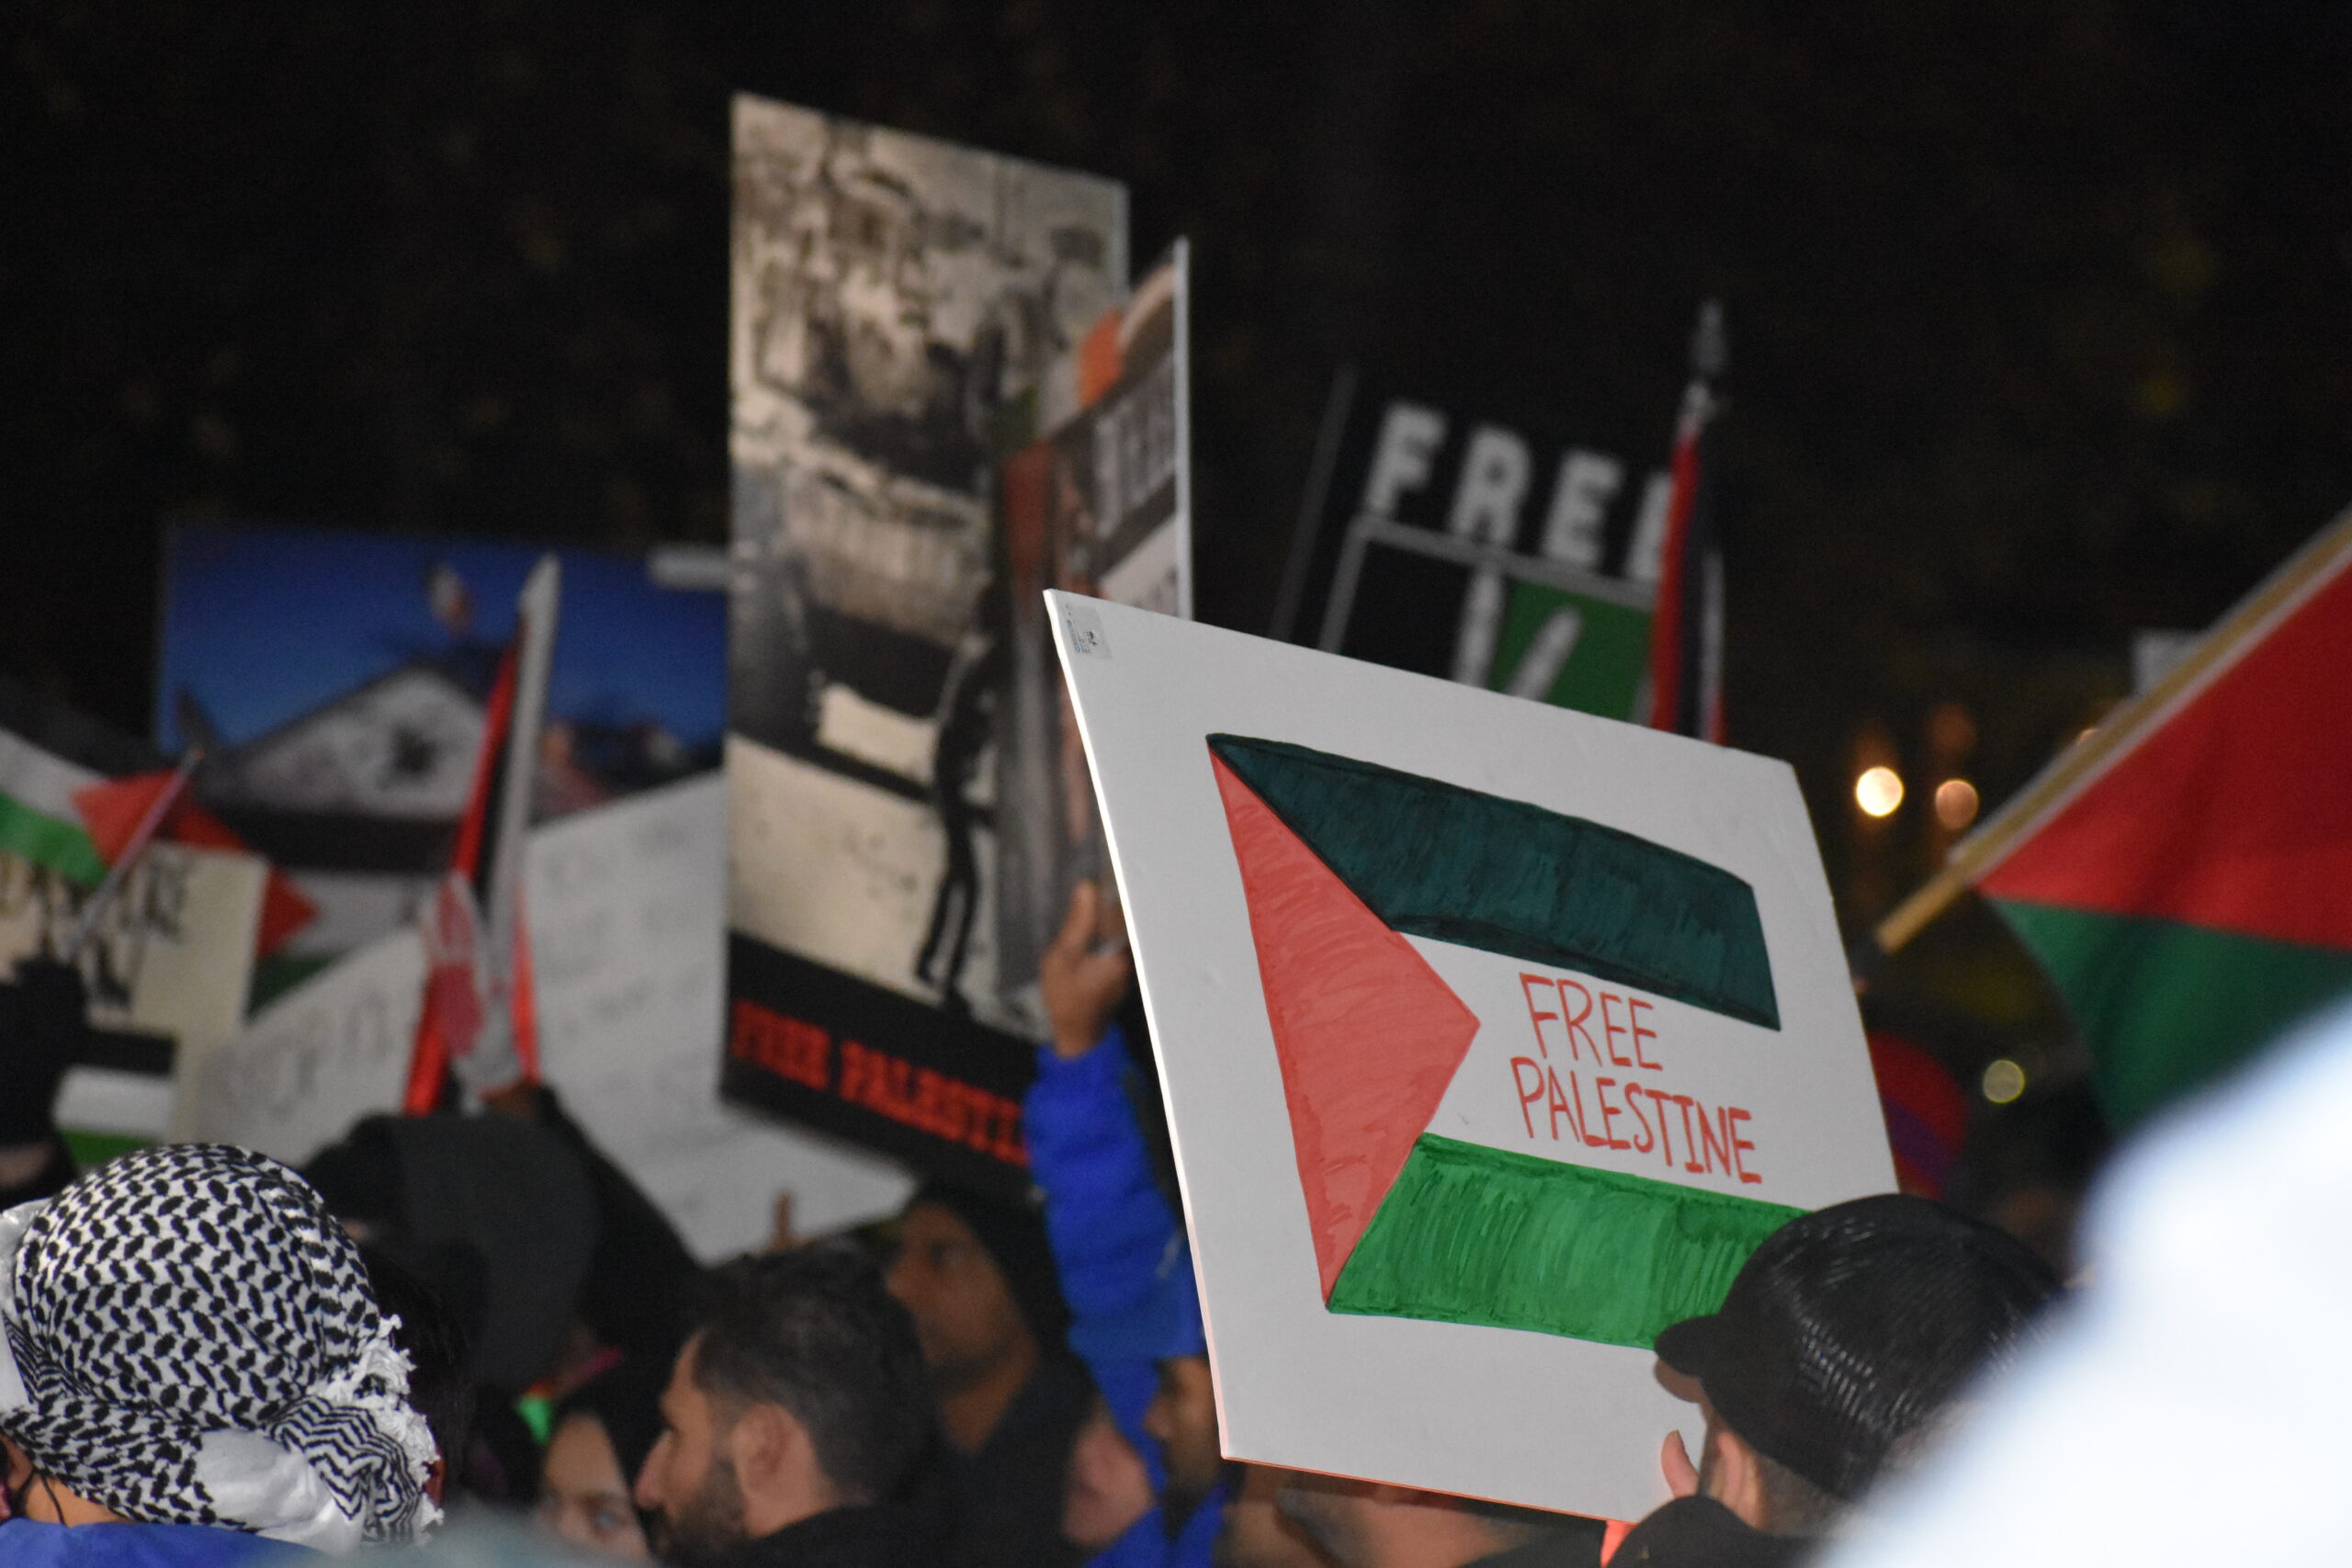 A collection of signs in the background, unfocused. A sign reading "Free Palestine" in the foreground.